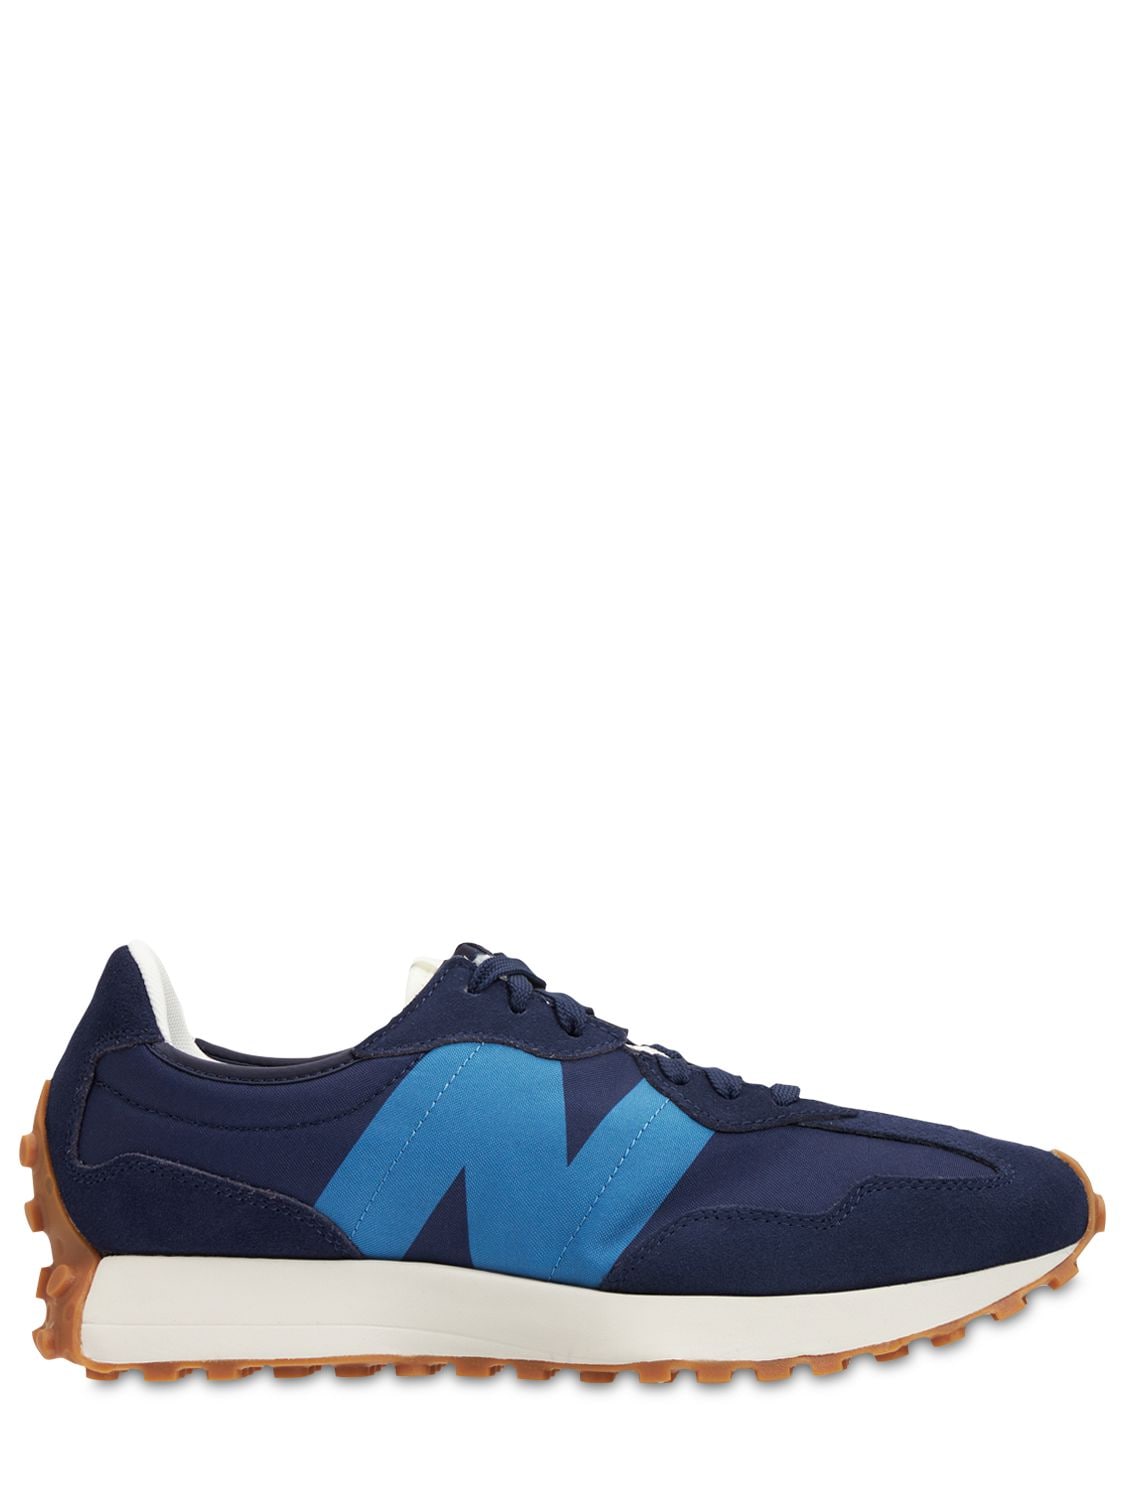 NEW BALANCE 327 SNEAKERS,74I4OW023-SEWX0